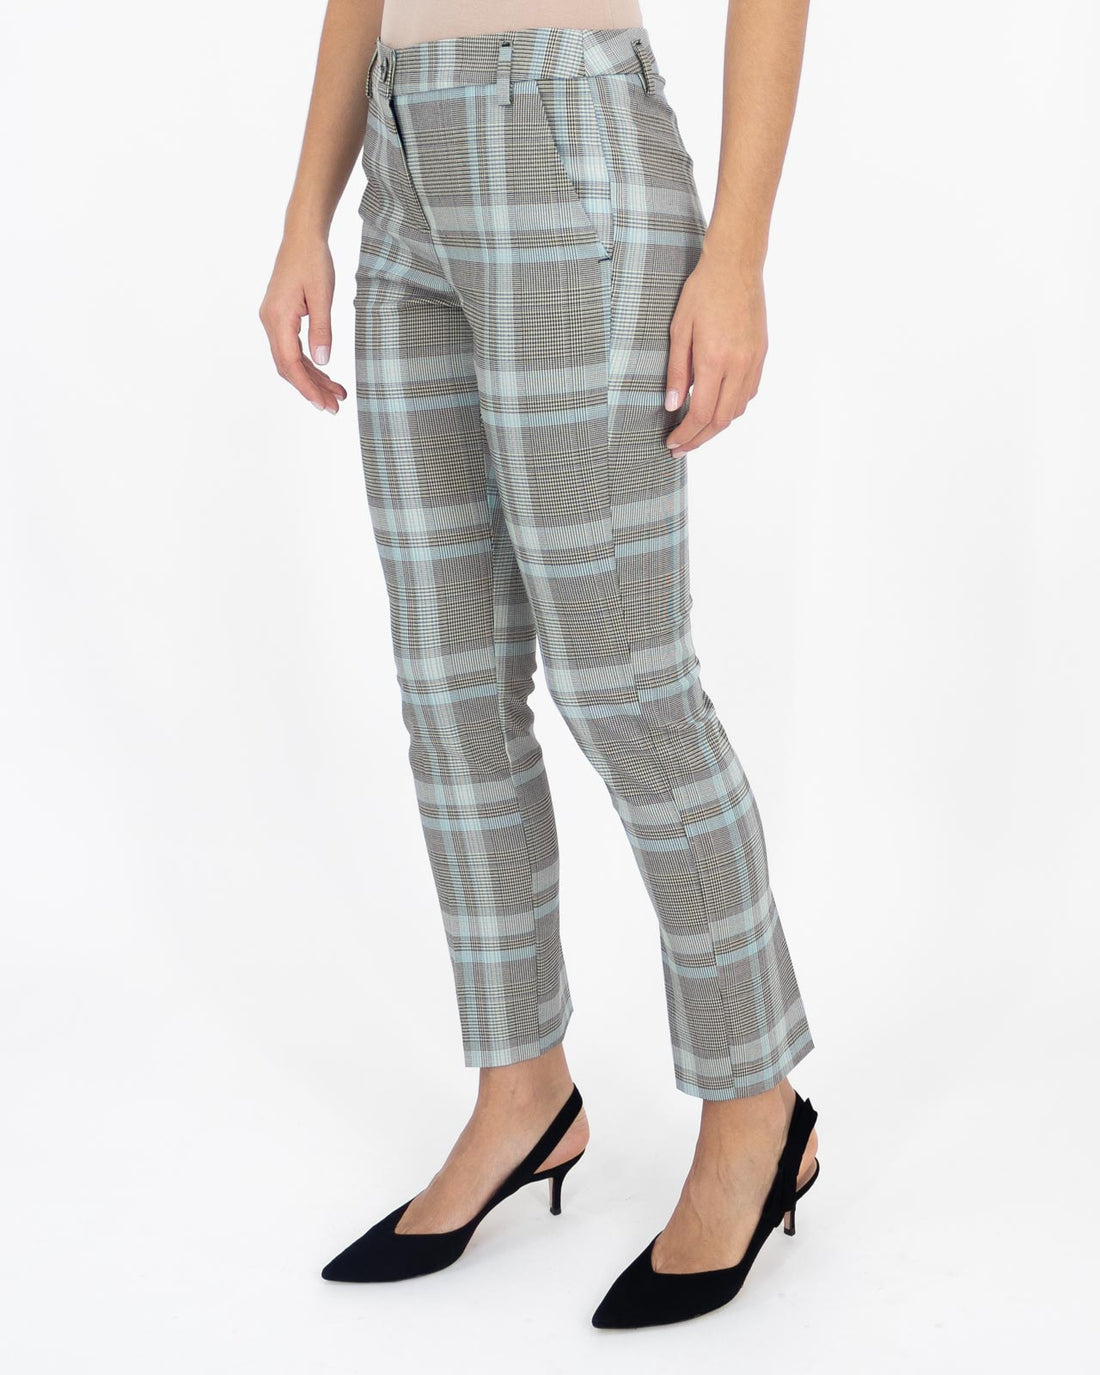 Light blue checked trousers